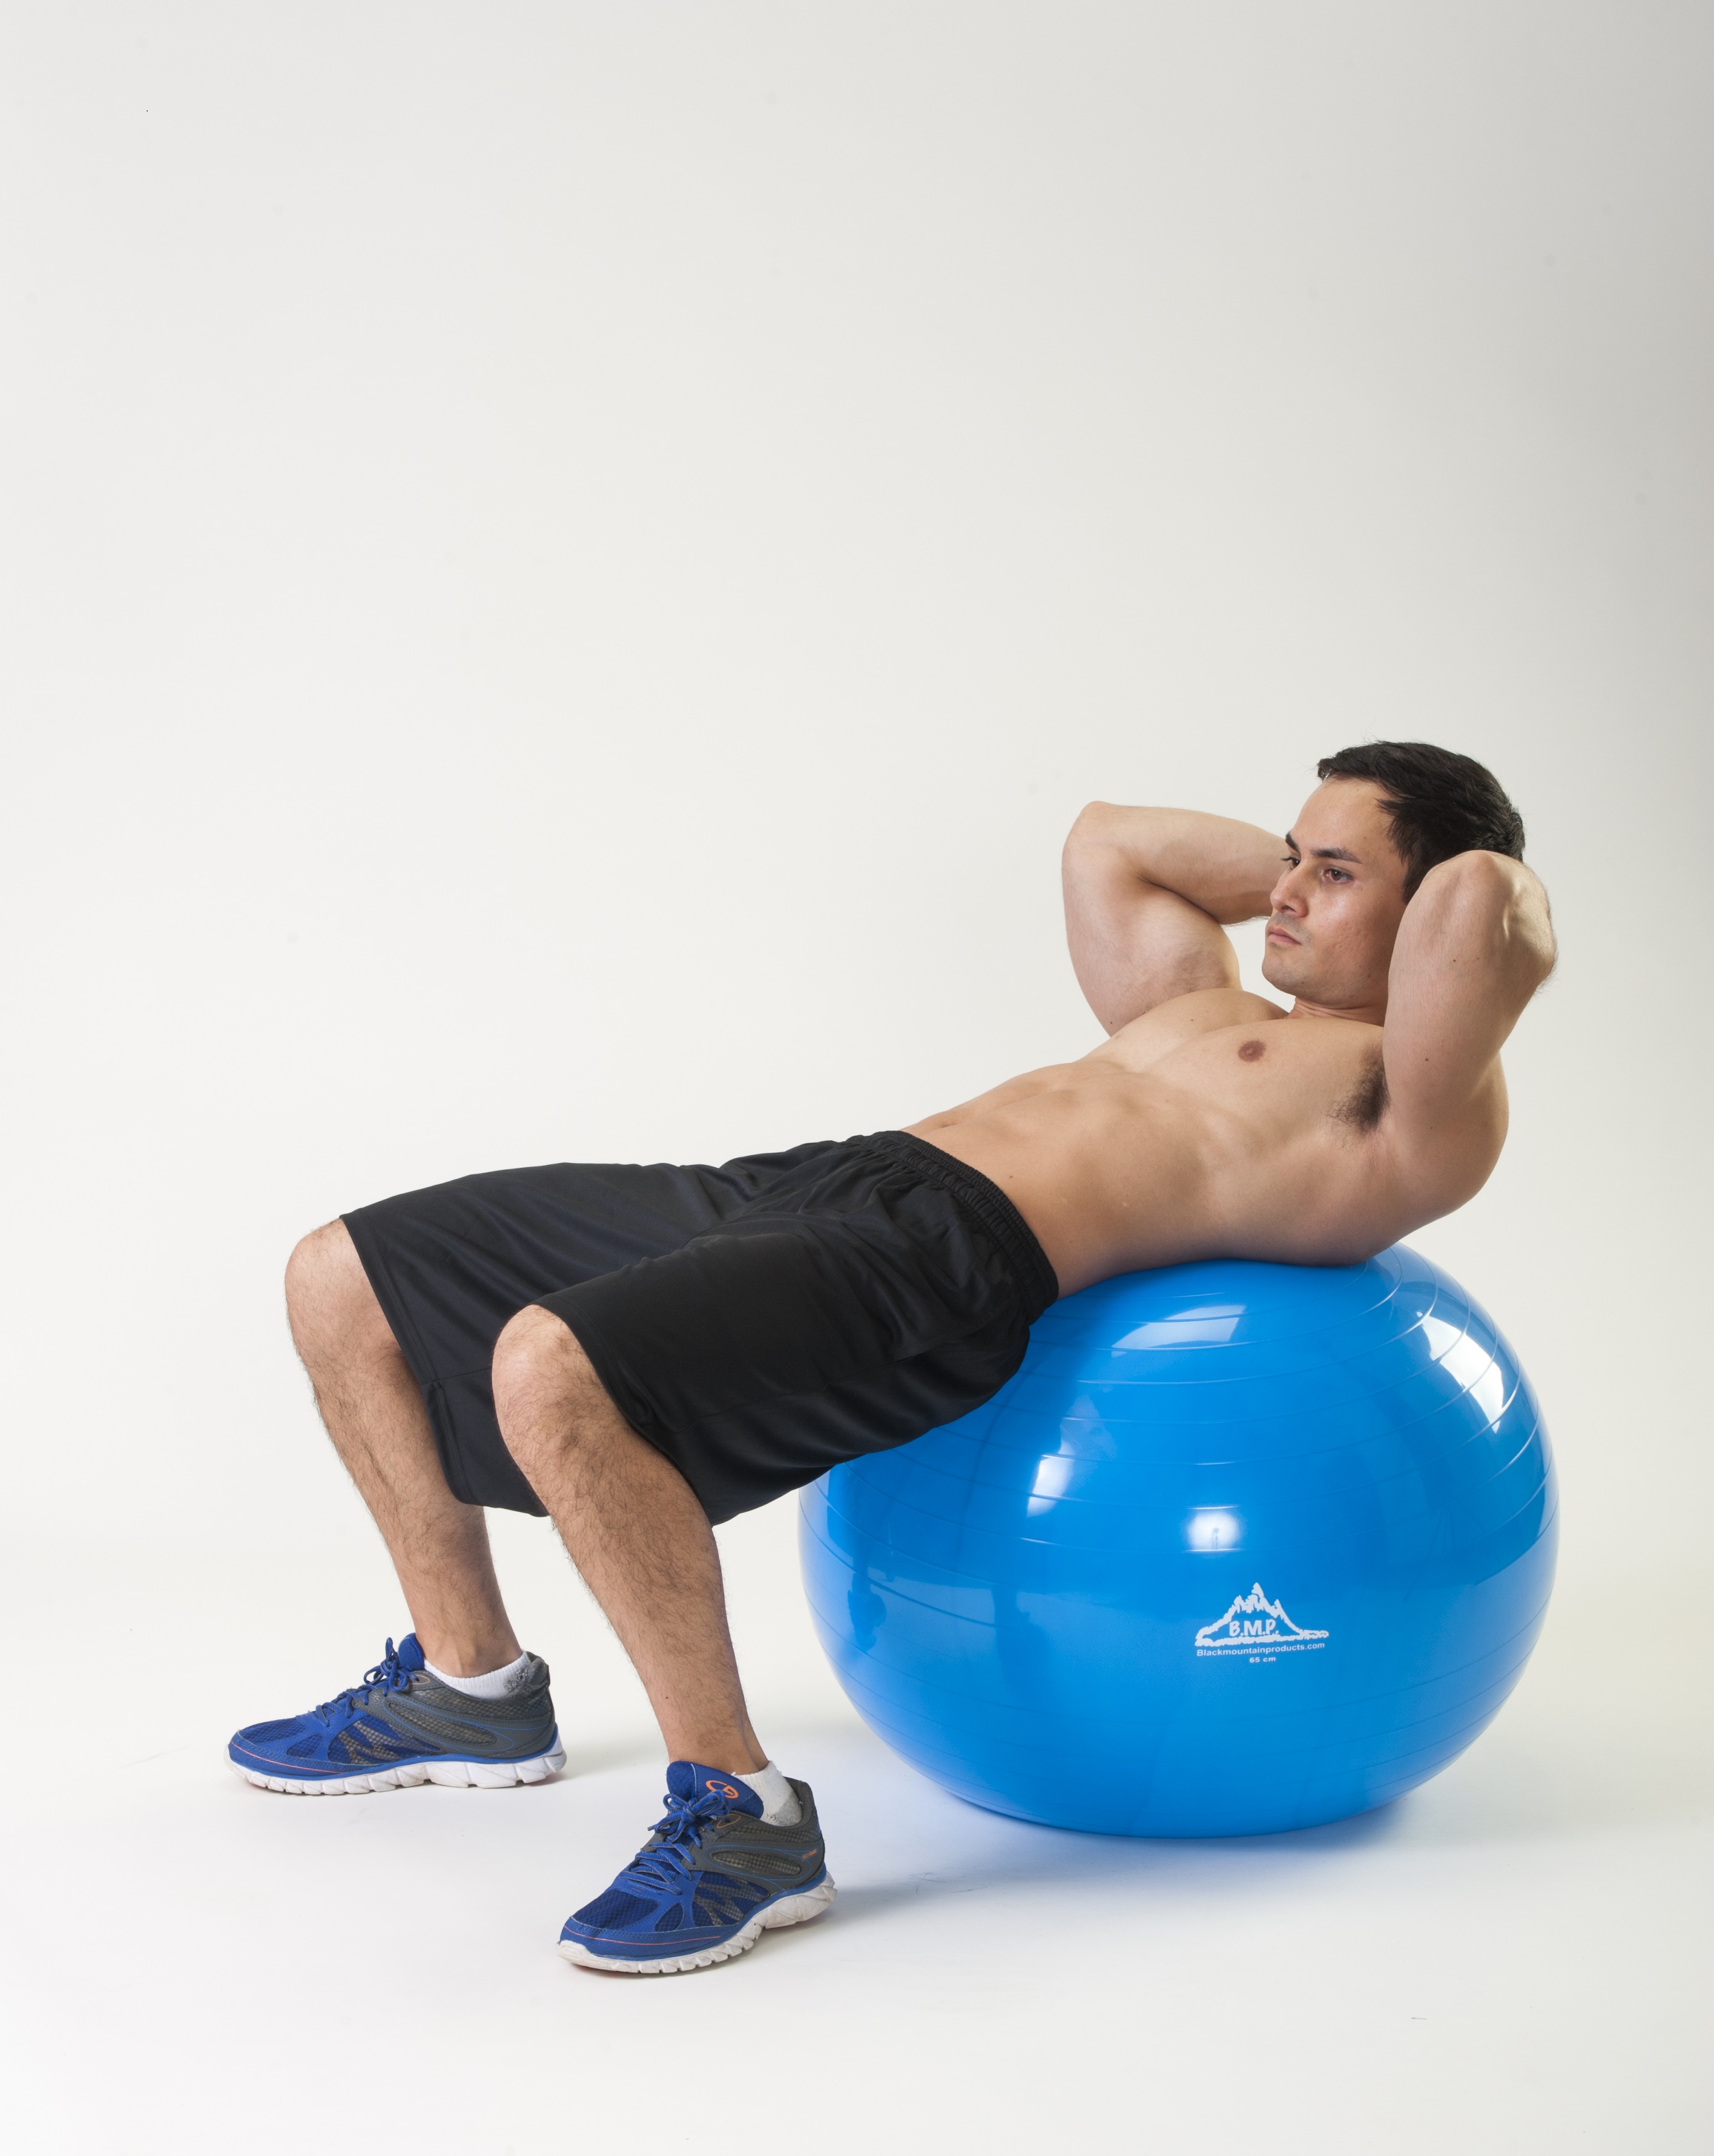 Black Mountain Products 2000lbs Static Strength Exercise Stability Ball with Pump, 65cm Blue - image 3 of 3